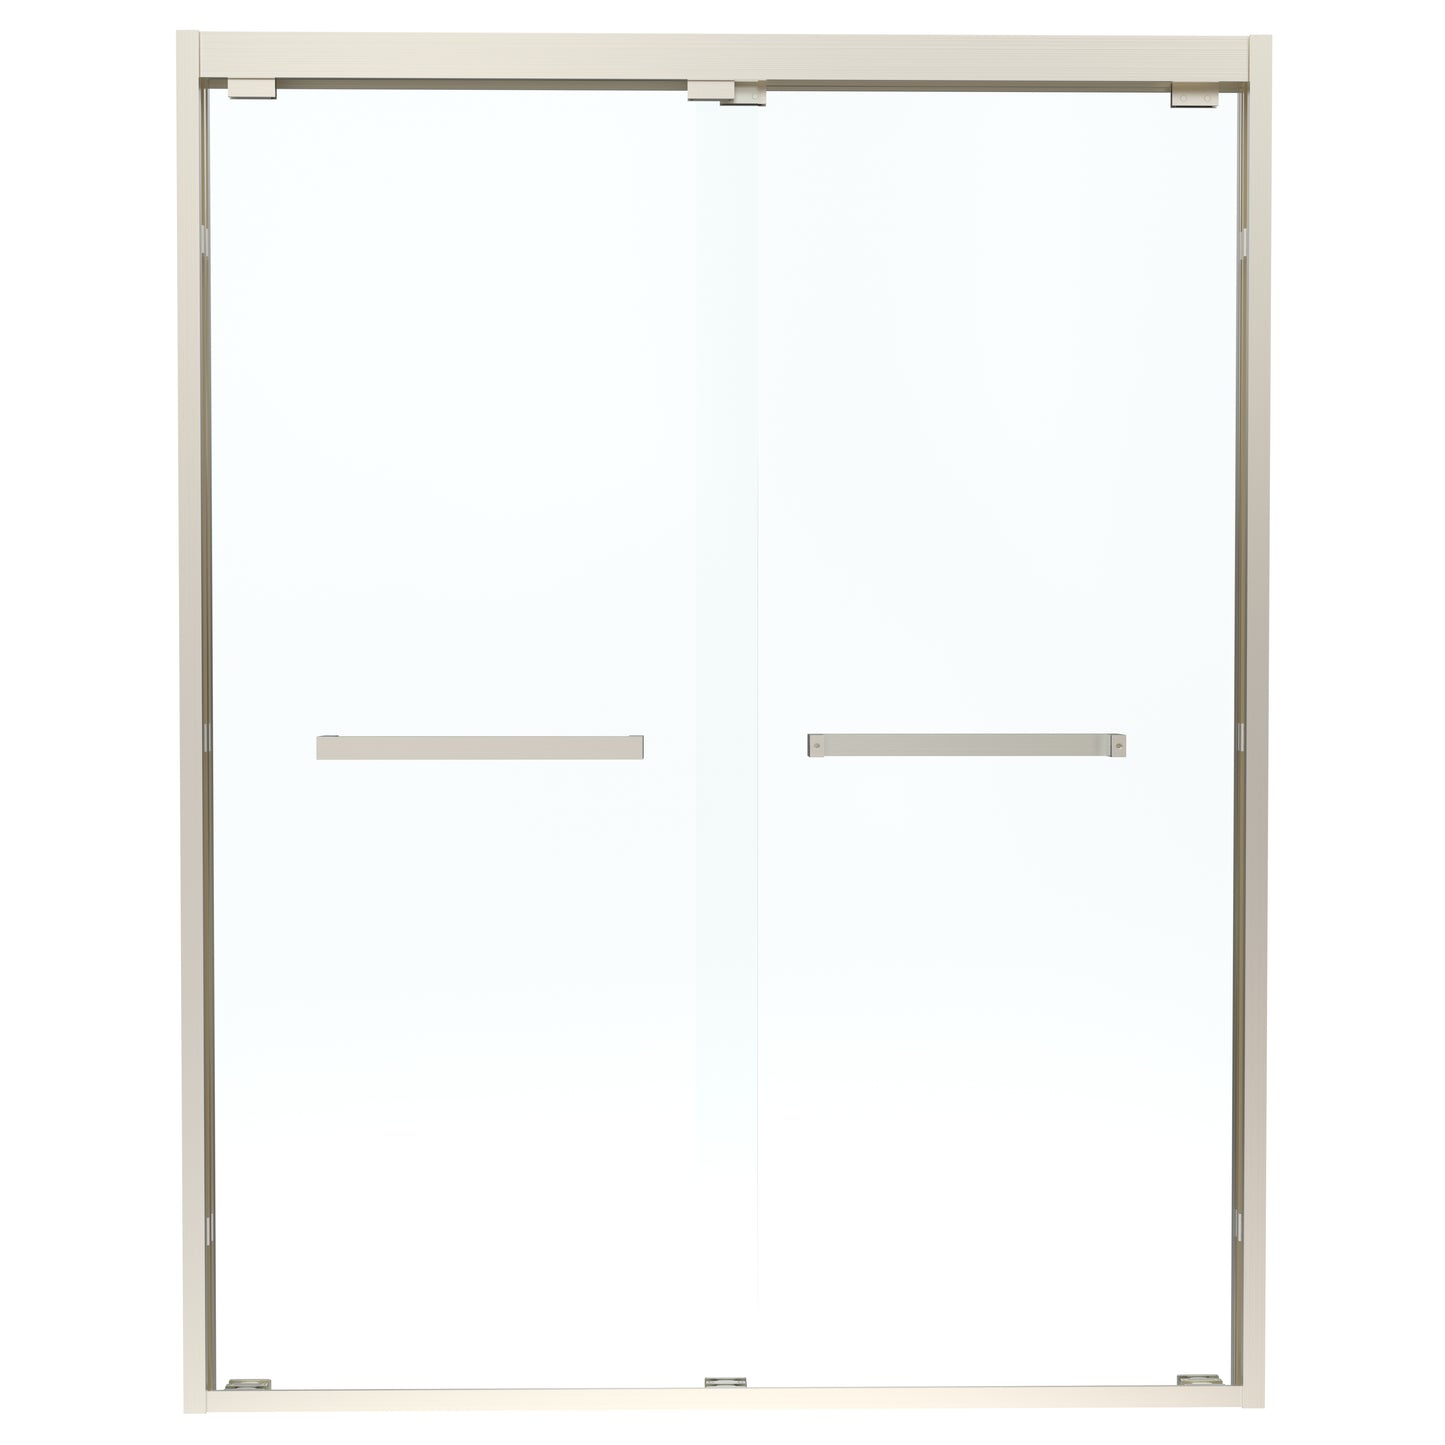 Waterpar® 56 in. to 60 in. W x 76 in. H Semi-Frameless Sliding Shower Door Brushed Nickel with Clear Glass